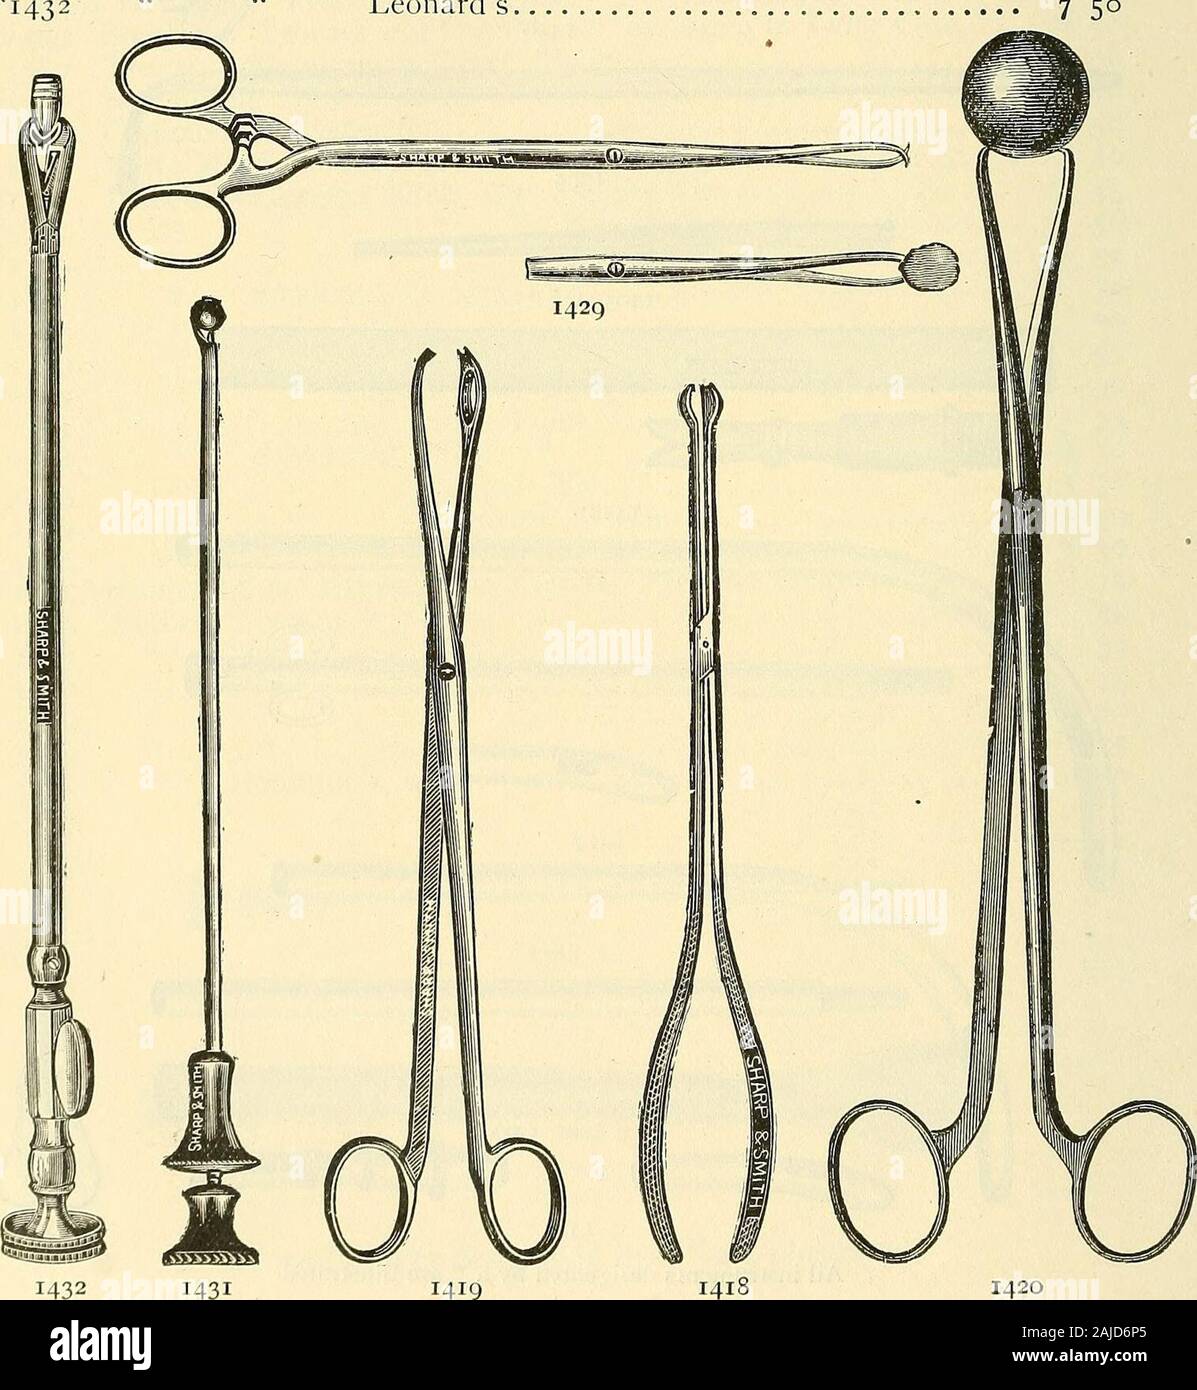 https://c8.alamy.com/comp/2AJD6P5/catalogue-of-sharp-smith-importers-manufacturers-wholesale-and-retail-dealers-in-surgical-instruments-deformity-apparatus-artificial-limbs-artificial-eyes-elastic-stockings-trusses-crutches-supporters-galvanic-and-faradic-batteries-etc-surgeons-appliances-of-every-description-i4i4-1394-all-instruments-designated-by-a-are-illustrated-334-sharp-smith-chicago-bullet-instruments-i4i8i4i9-i420-14211422-1423-1424-1425-1426-1427-1428i429-1430i43i-bullet-forceps-u-s-a-gross-american-i-5075so-t-cos-spiral-3-40-latest-2-60-moses-2-60-gunns-2-25-hamiltons-i-75-d-2AJD6P5.jpg